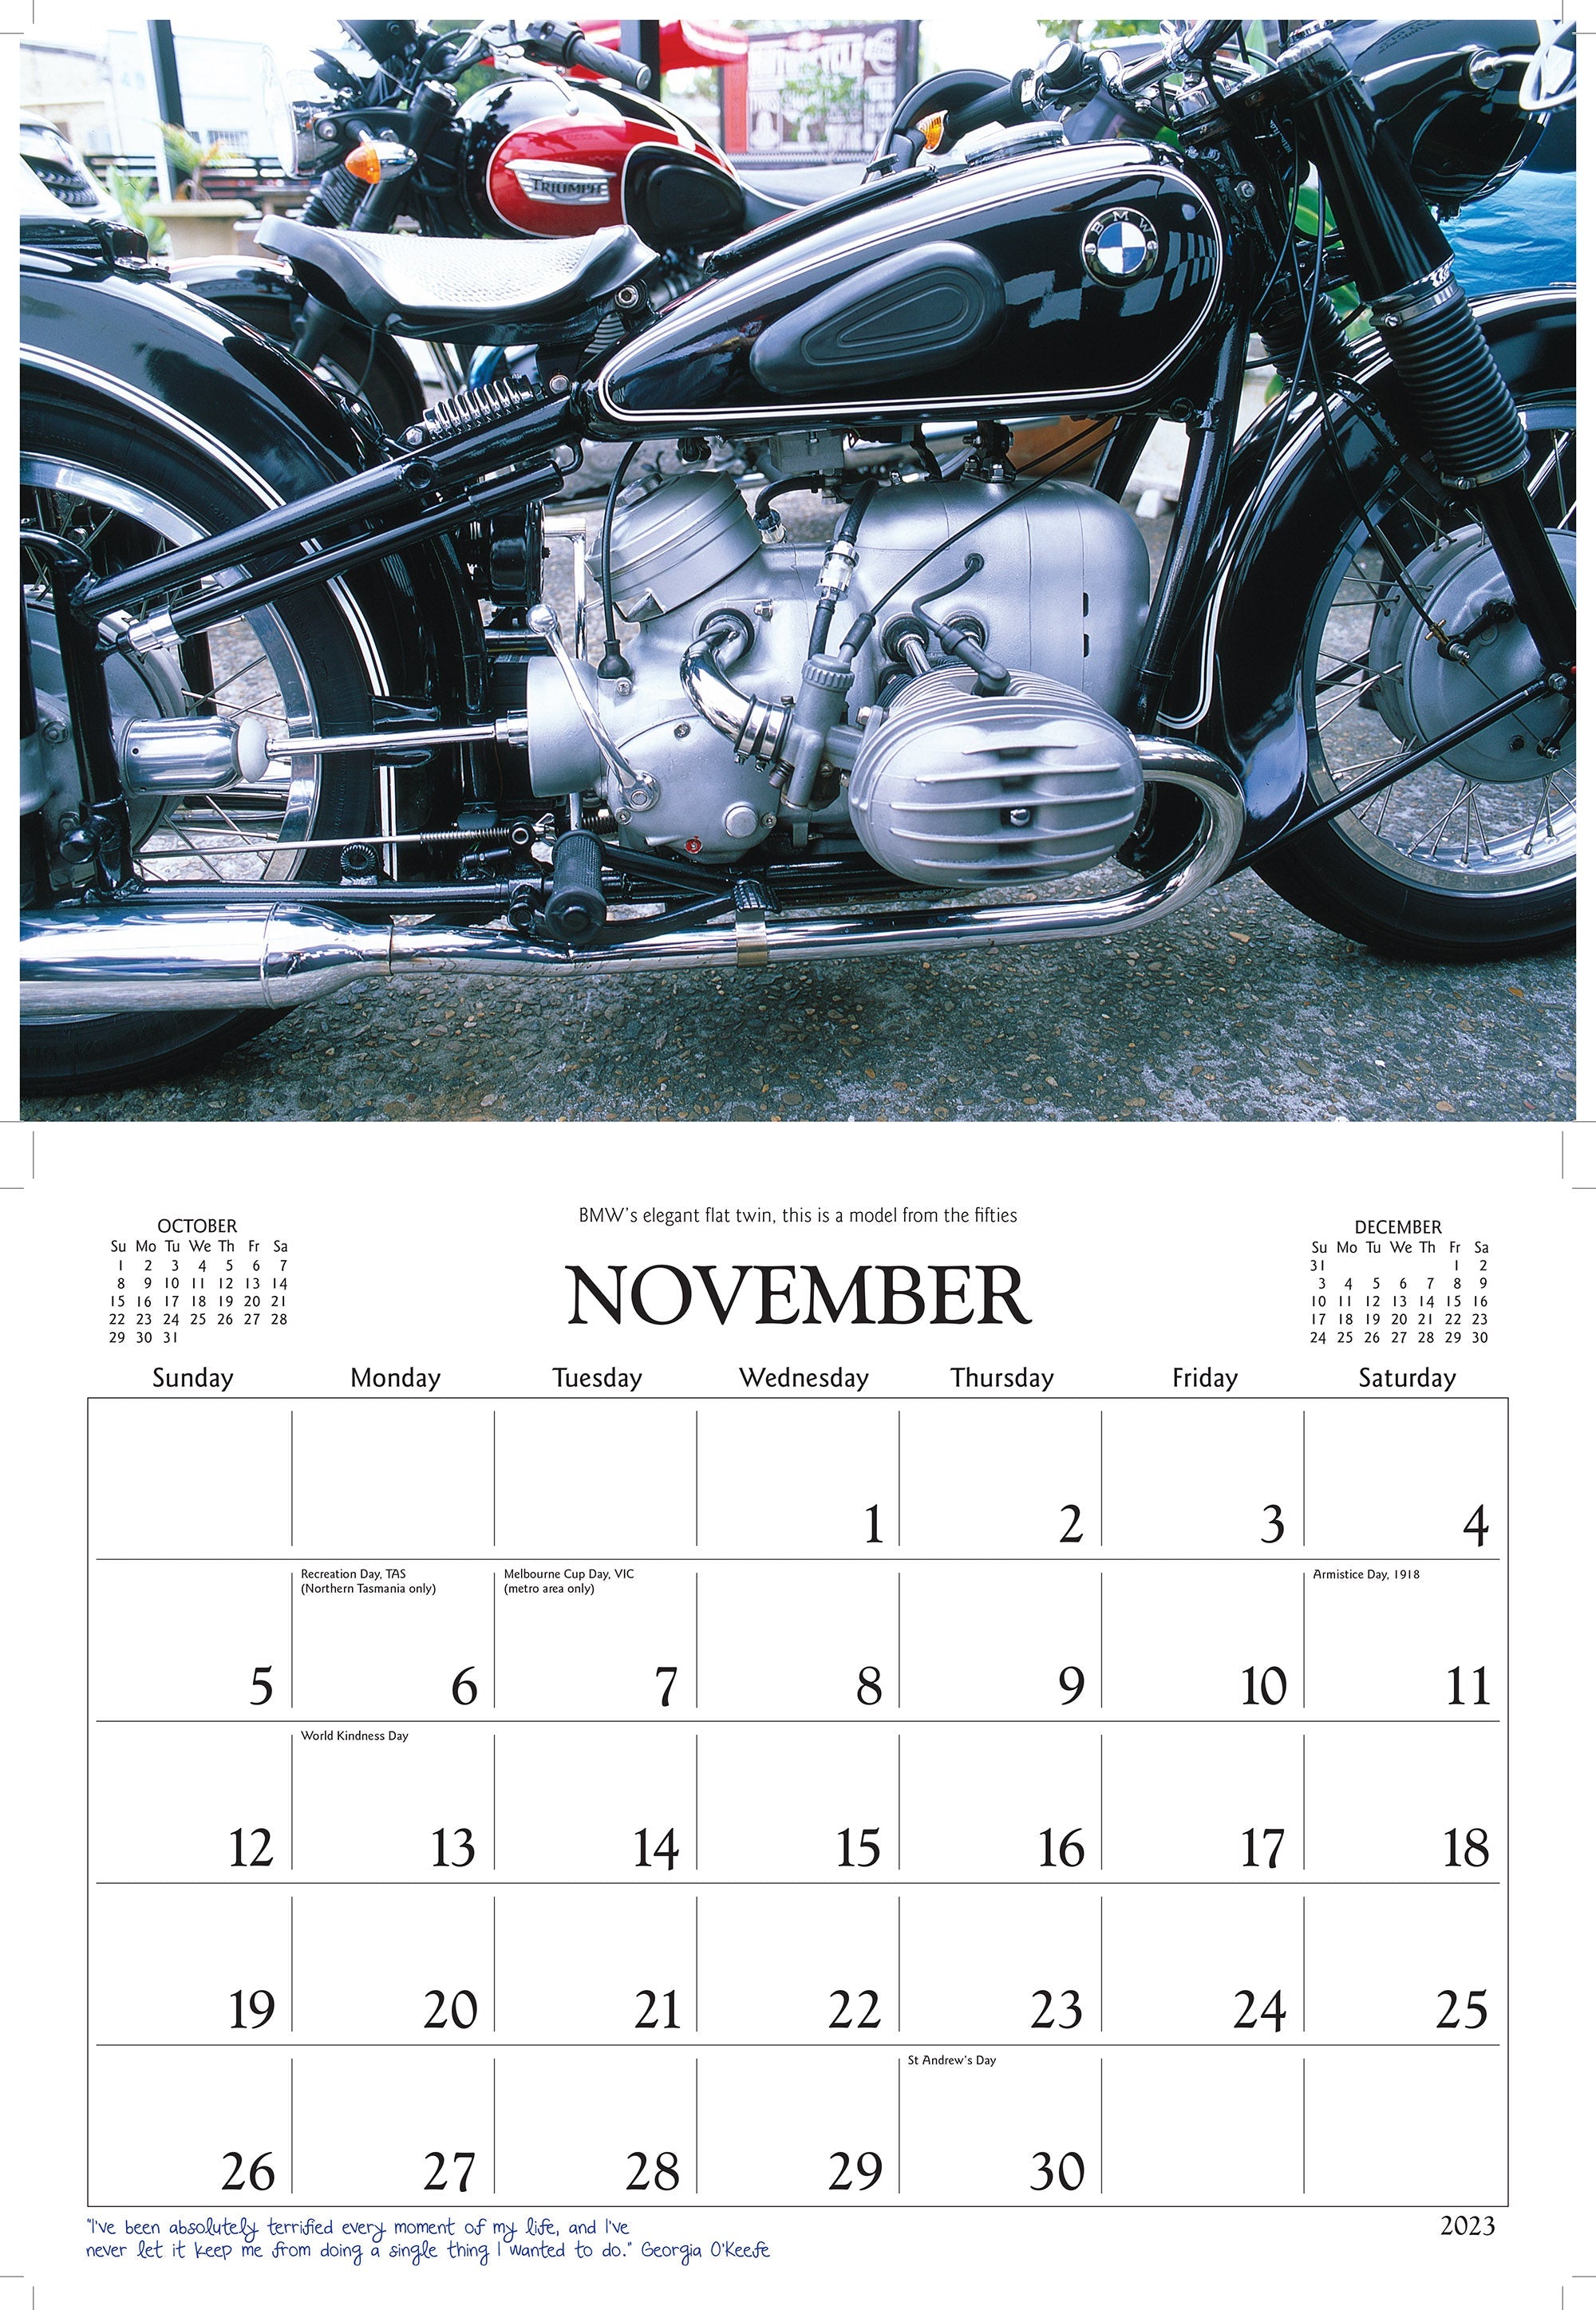 2023 Magnificent Motorcycles by David Messent - Horizontal Wall Calendar